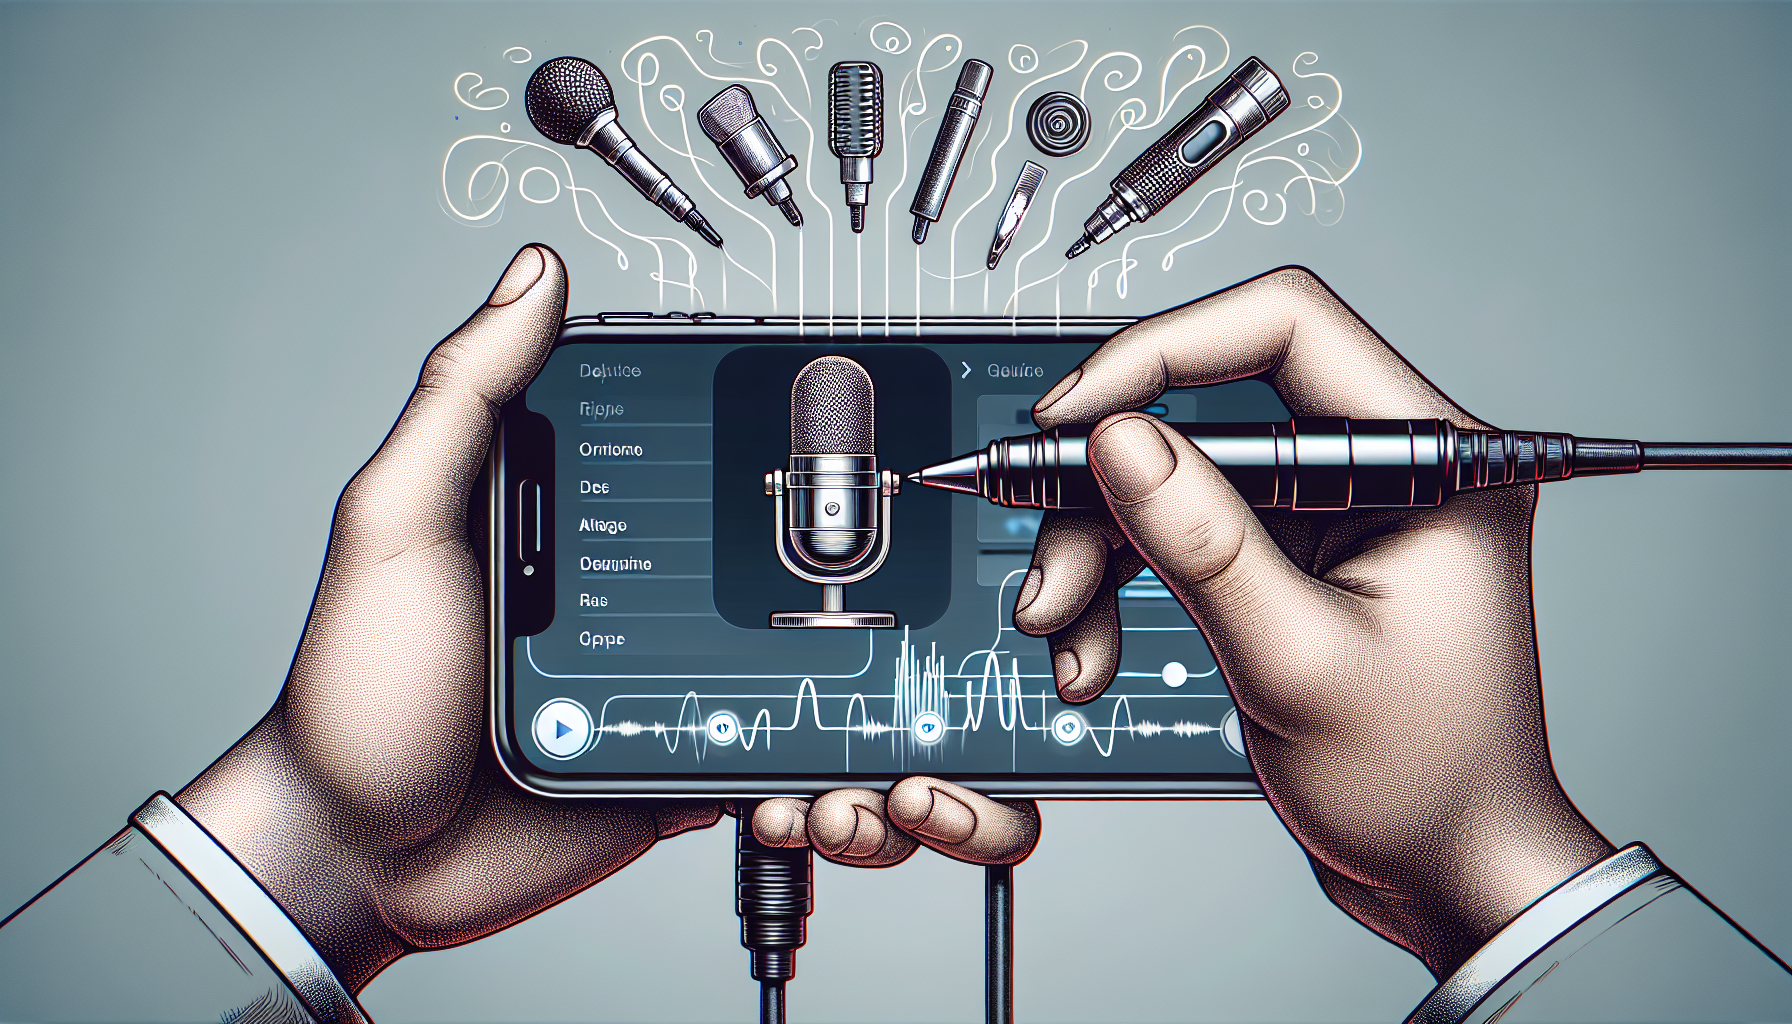 Illustration showing tips for optimizing iPhone microphone performance